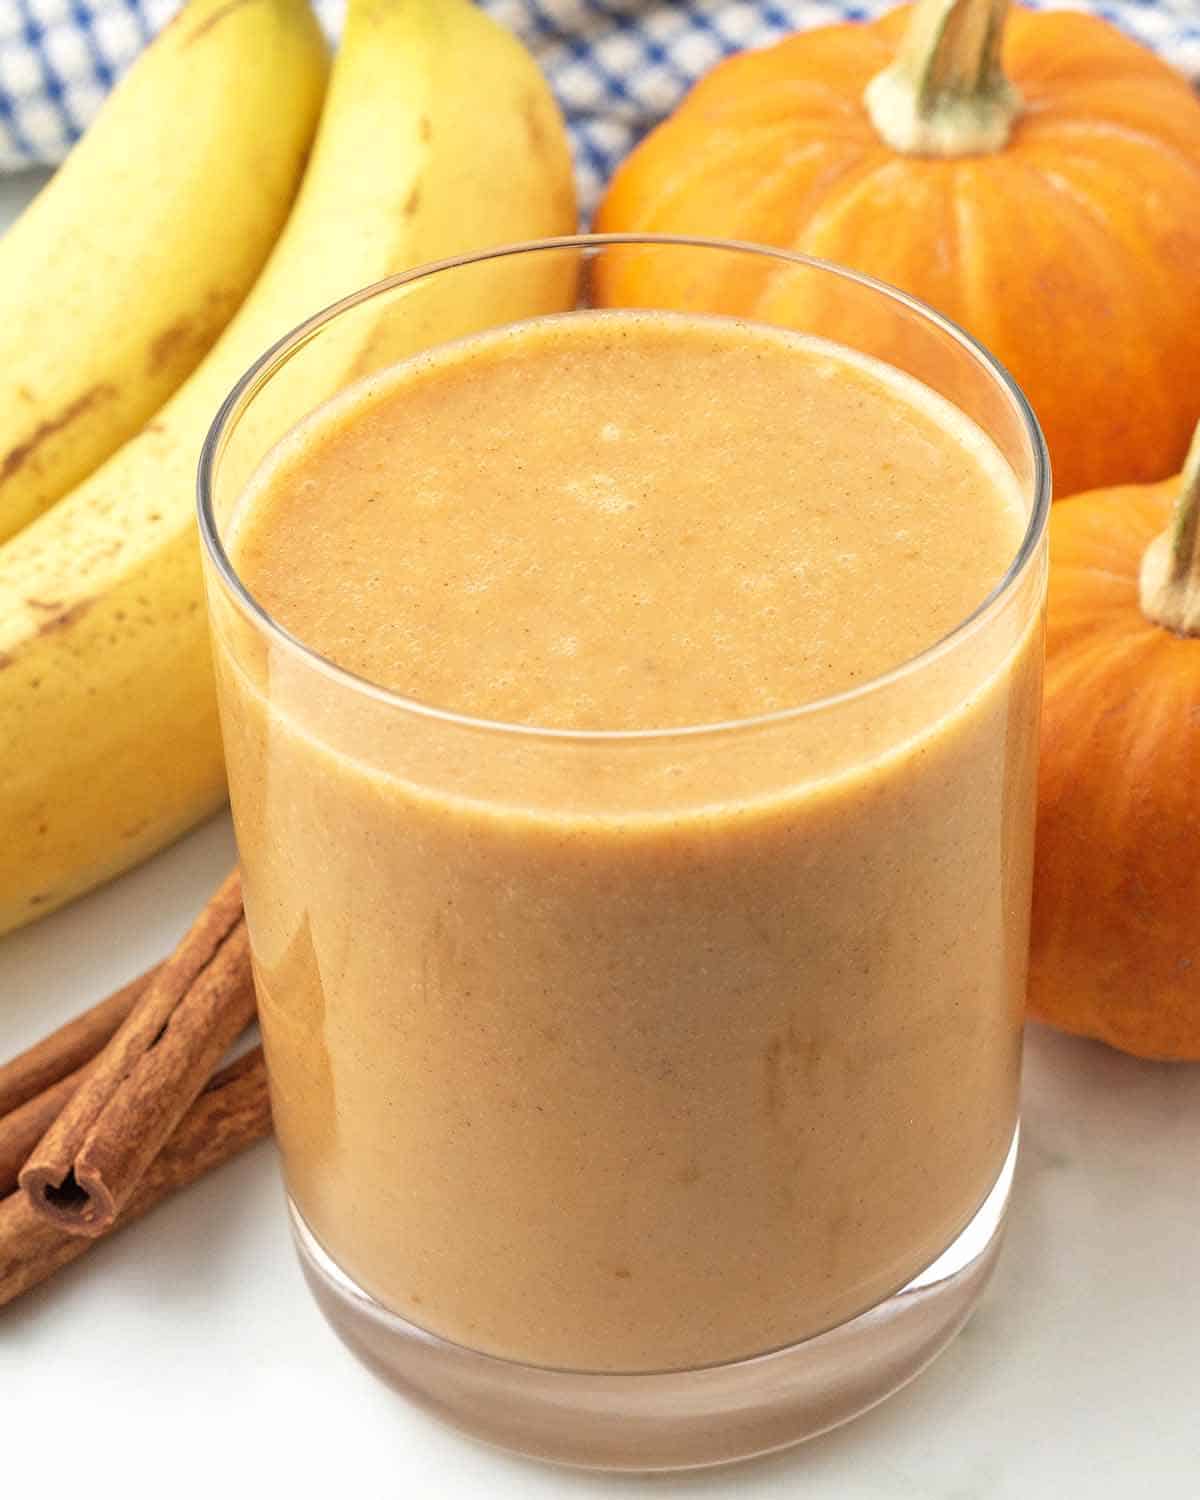 A glass of filled with almond milk pumpkin smoothie, bananas, mini pumpkins, and cinnamon sticks sit around the glass.